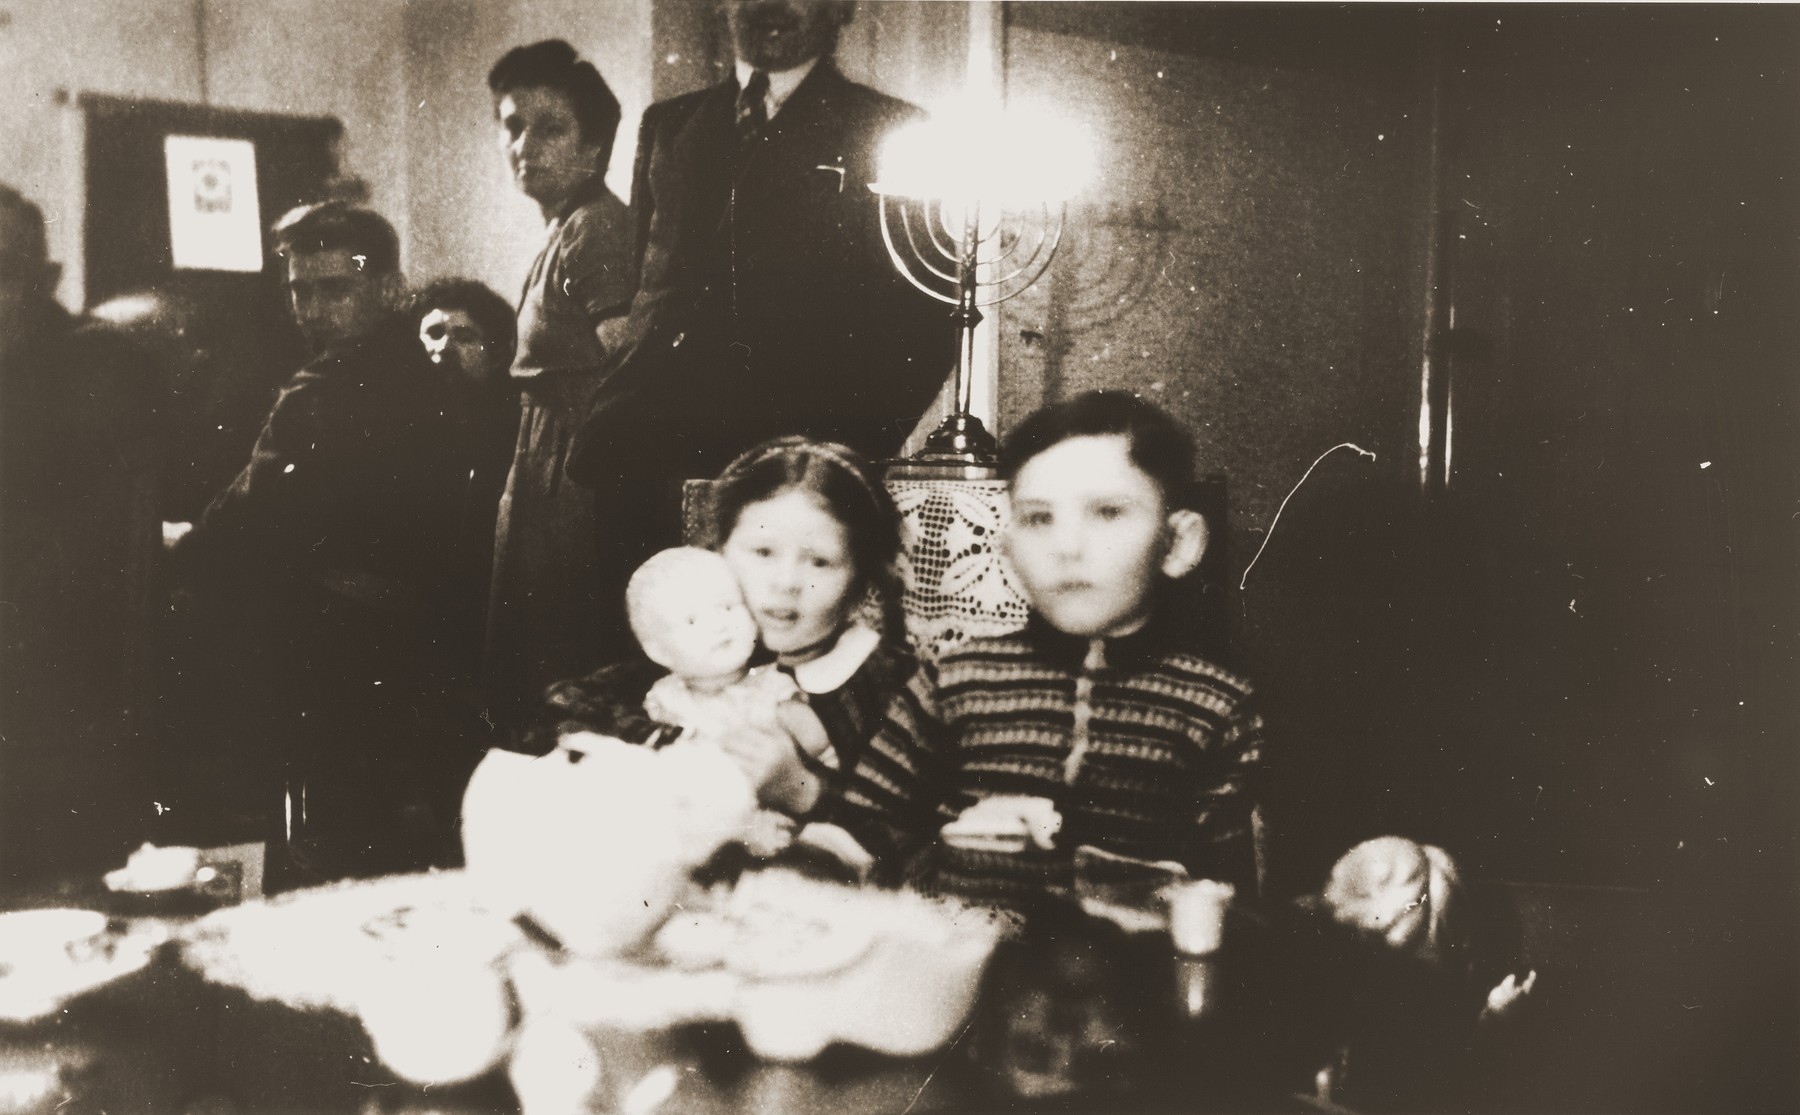 Two young Jewish children sit in front of a lighted Hanukkah menorah at the first postwar family Hanukkah celebration at the Zion home in Eibergen.

Pictured clutching her new doll is Betty Rosenbaum.  Betty, who was orphaned during the war, was adopted by her uncle Julius Zion after his marriage in 1946.